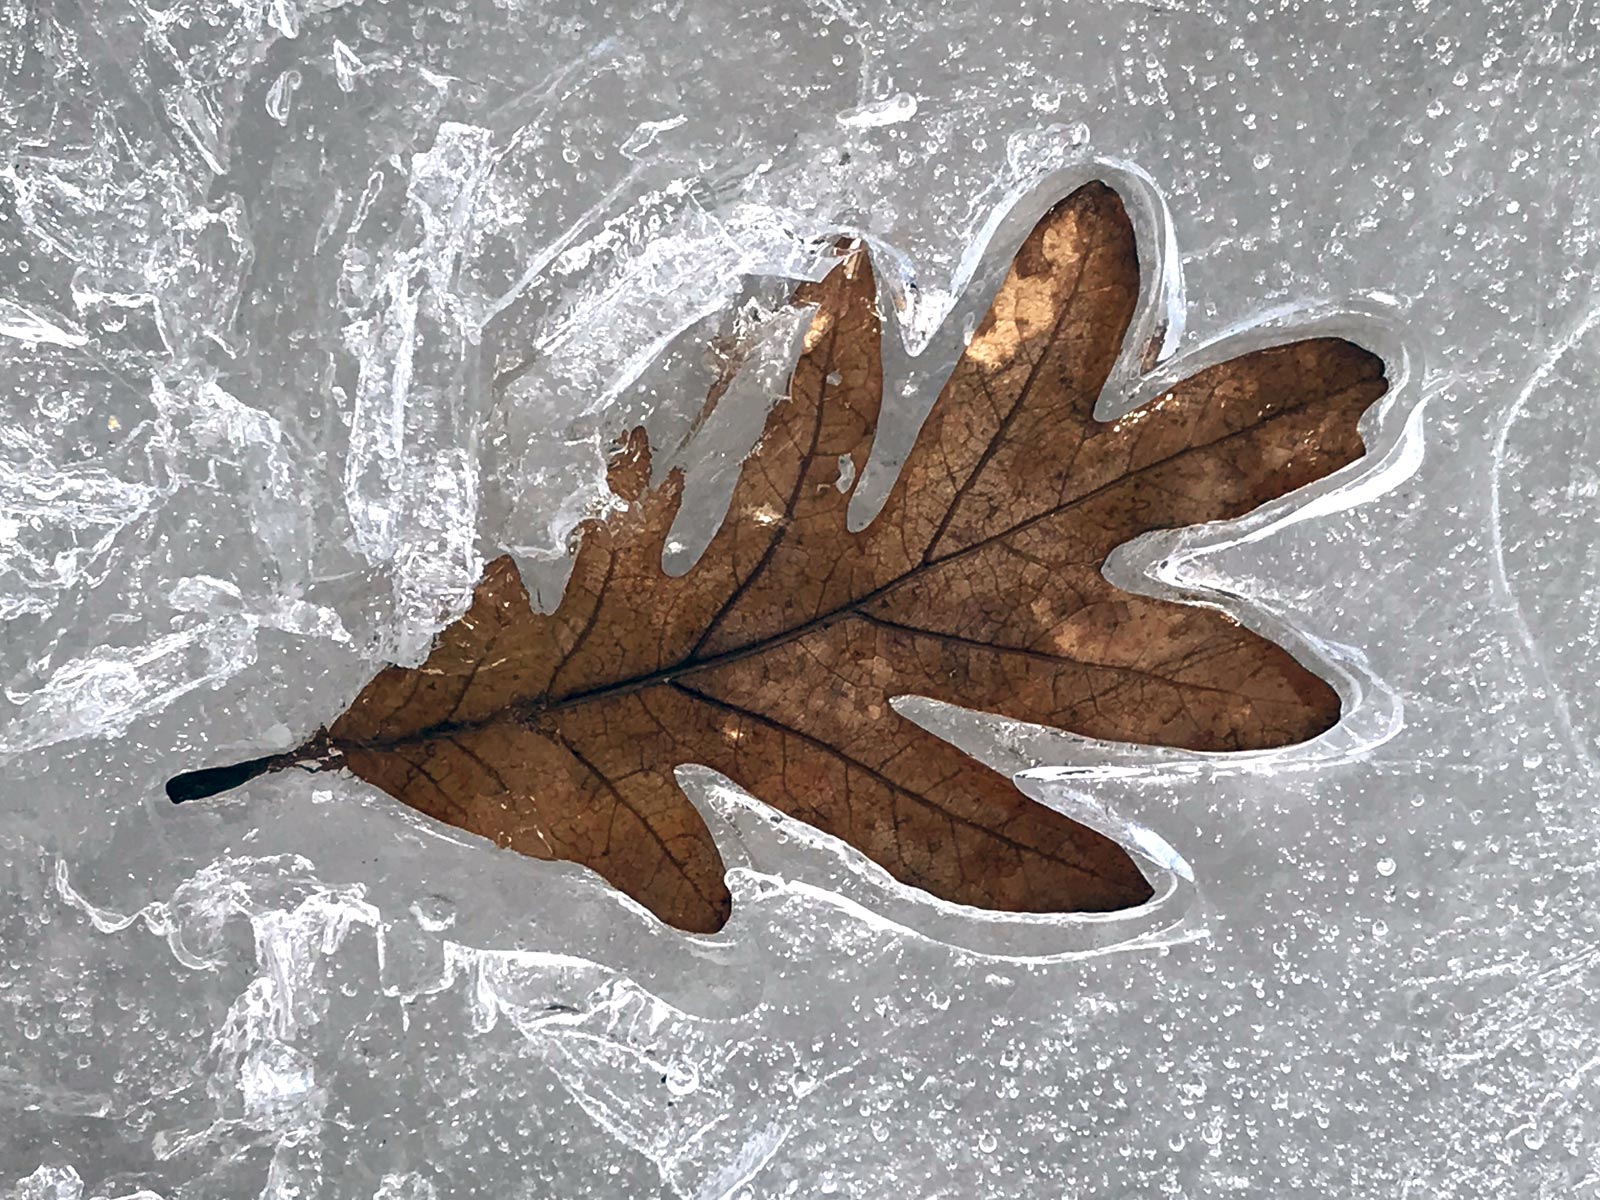 A Fall Oak leaf frozen in winter time thawing with ice crystals along its edges